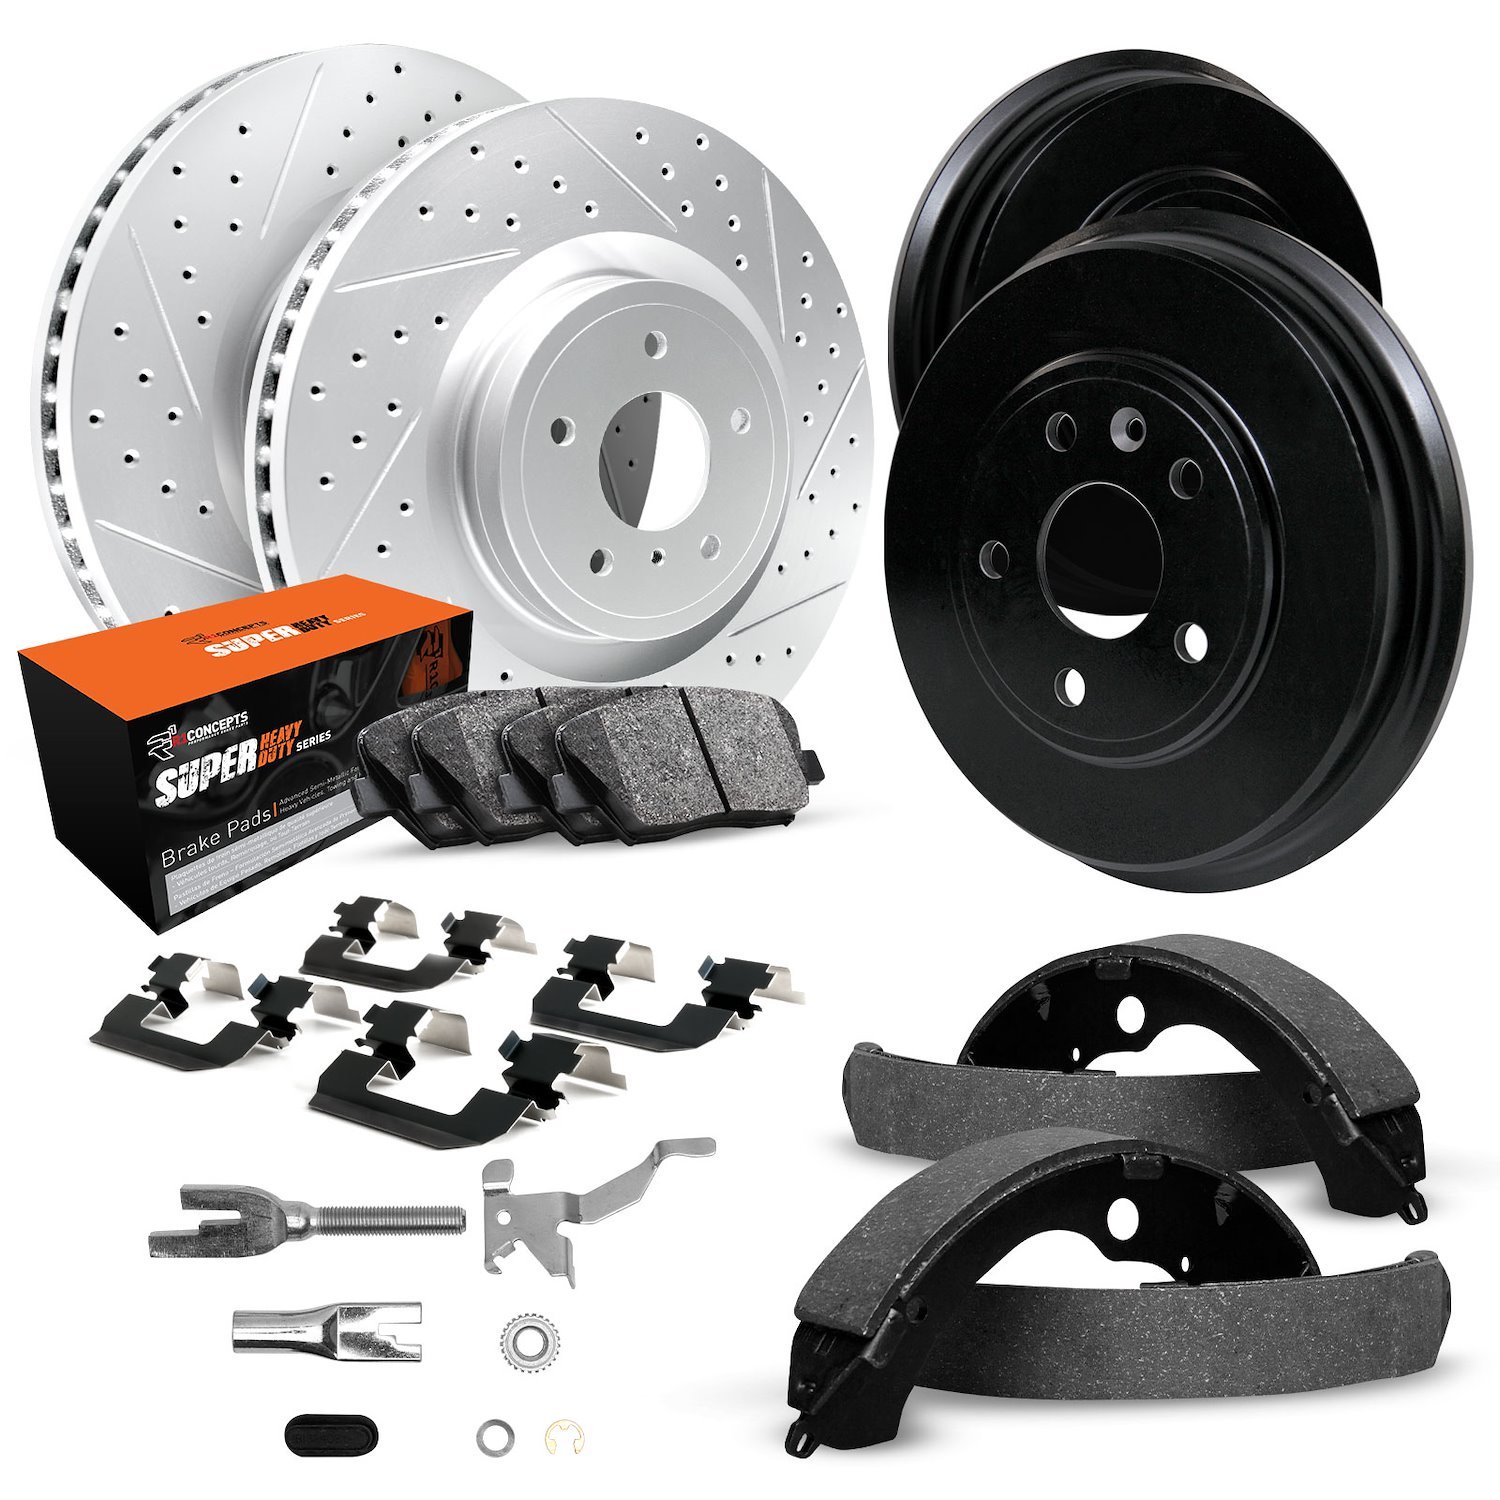 GEO-Carbon Drilled/Slotted Rotors/Drums w/Super-Duty Pads/Shoes/Hardware/Adjusters, 1992-2002 GM, Position: Front/Rear